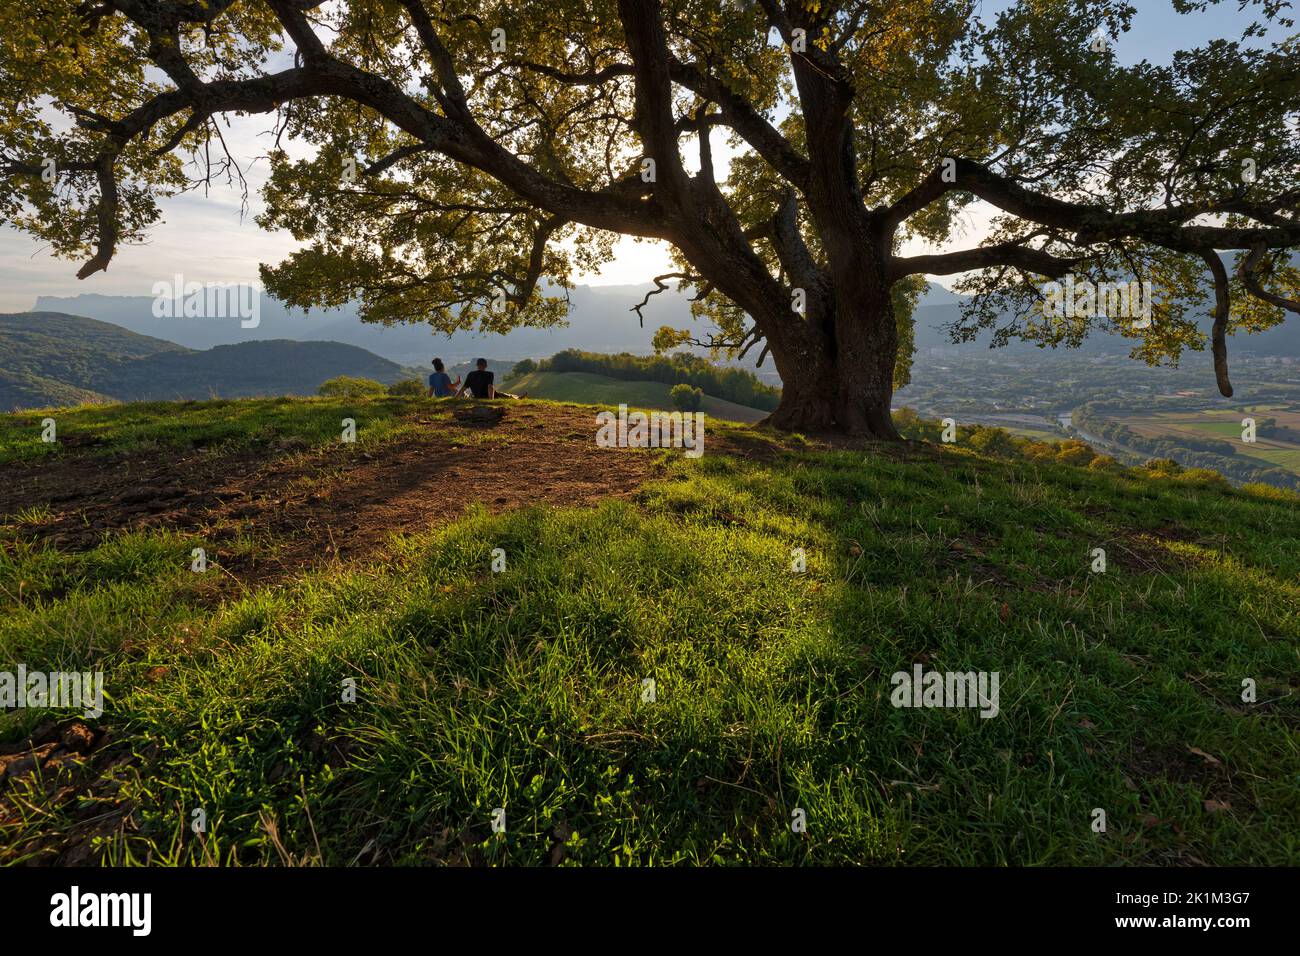 VENON, FRANCE, September 1, 2022 : Young couple rest at sunset under an old oak, called 'Le Chene de Venon', one of famous tree in french alps. Stock Photo